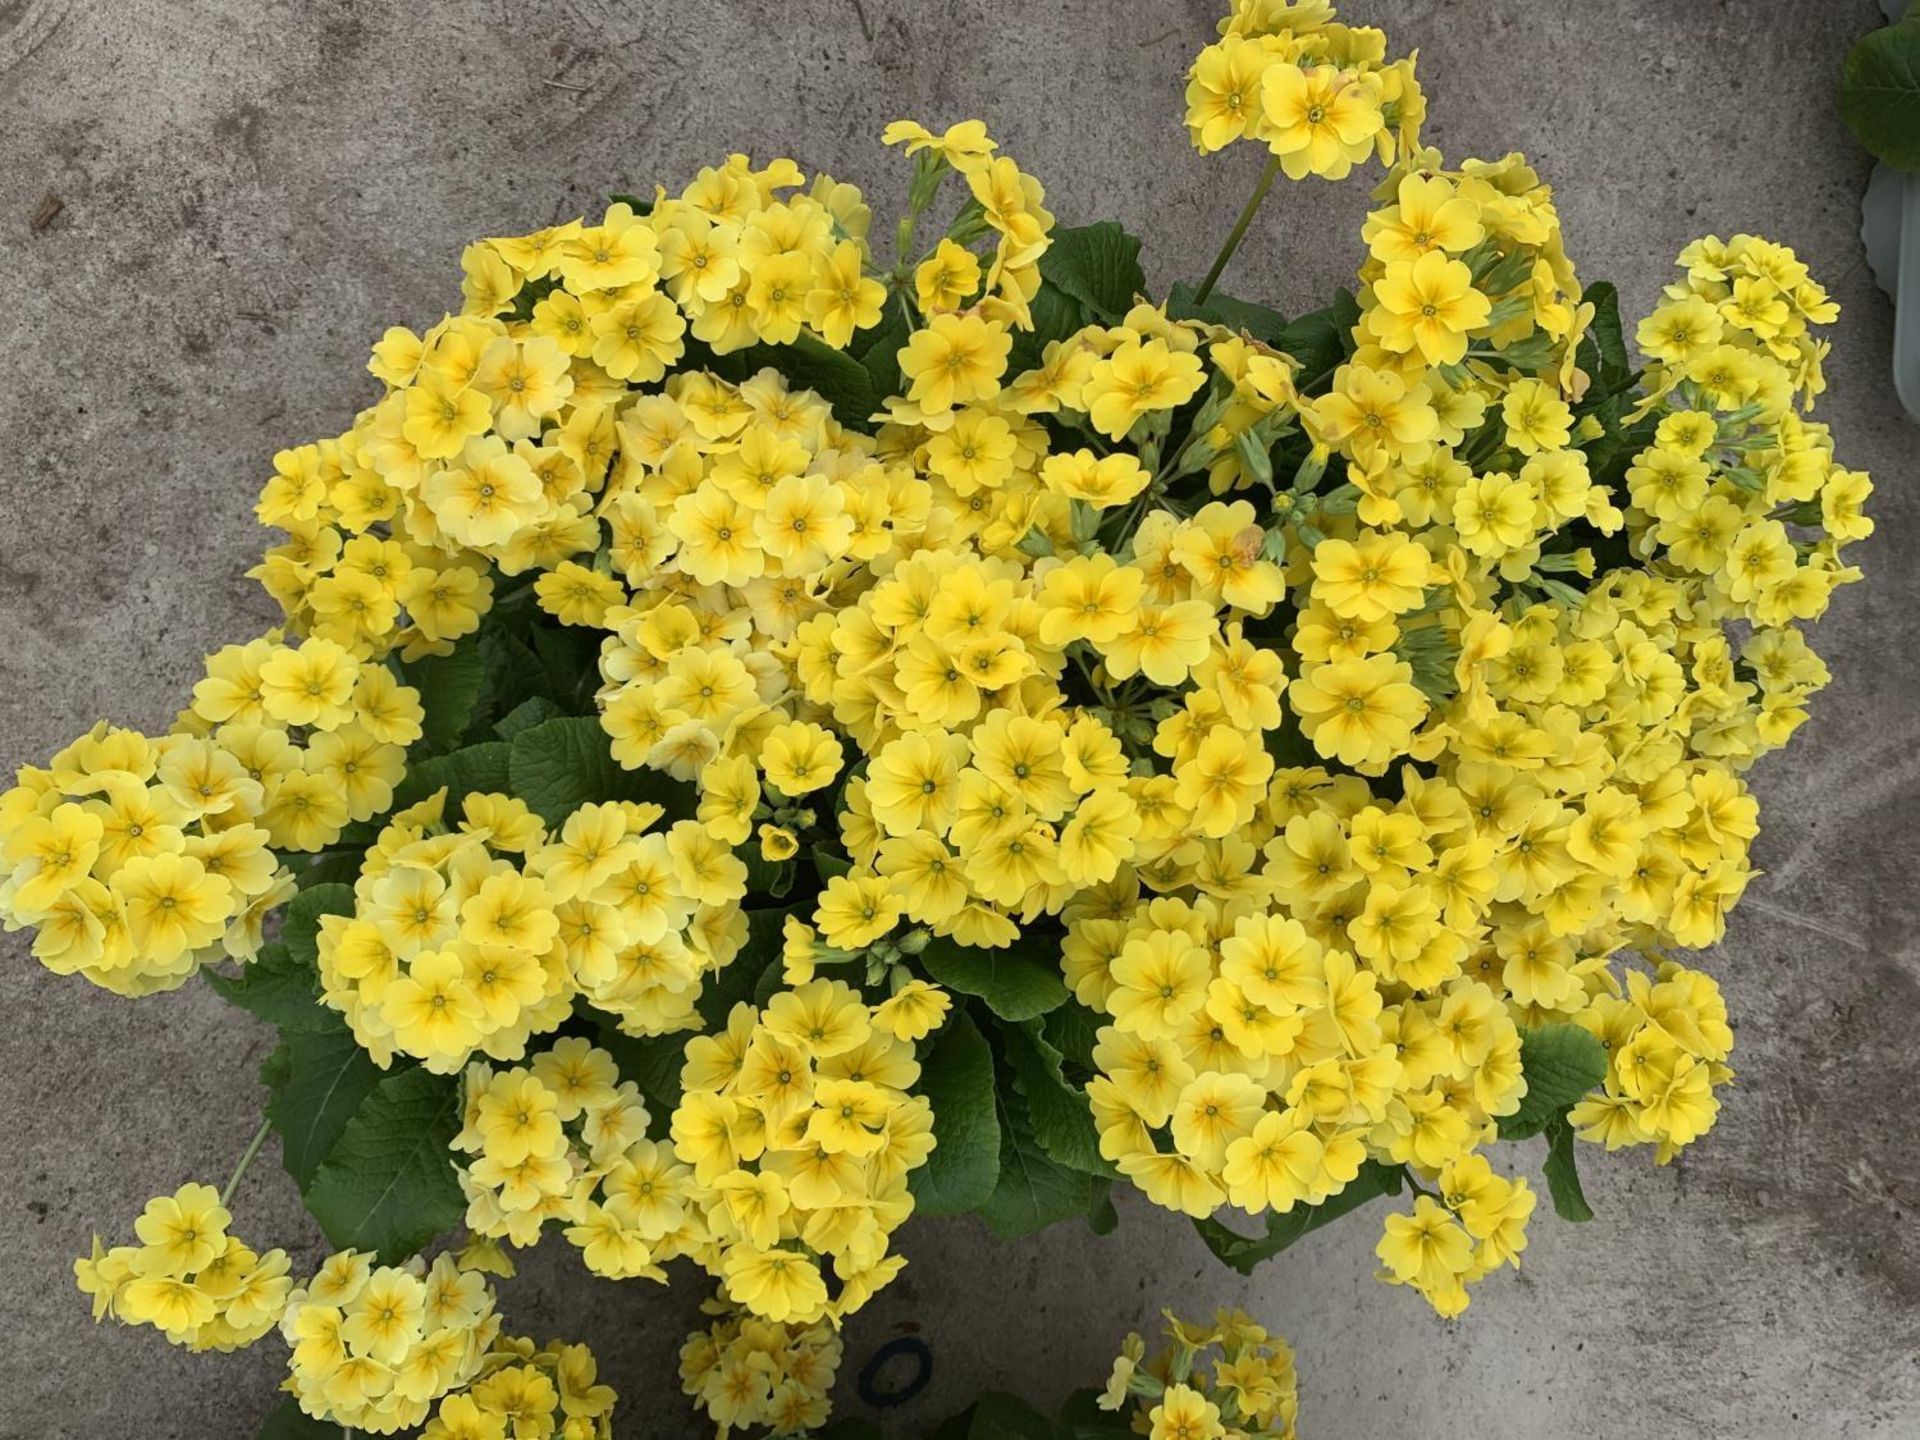 SIX GOLDEN NUGGET SCENTED YELLOW POLYANTHUS PLUS VAT TO BE SOLD FOR THE SIX - Image 2 of 4